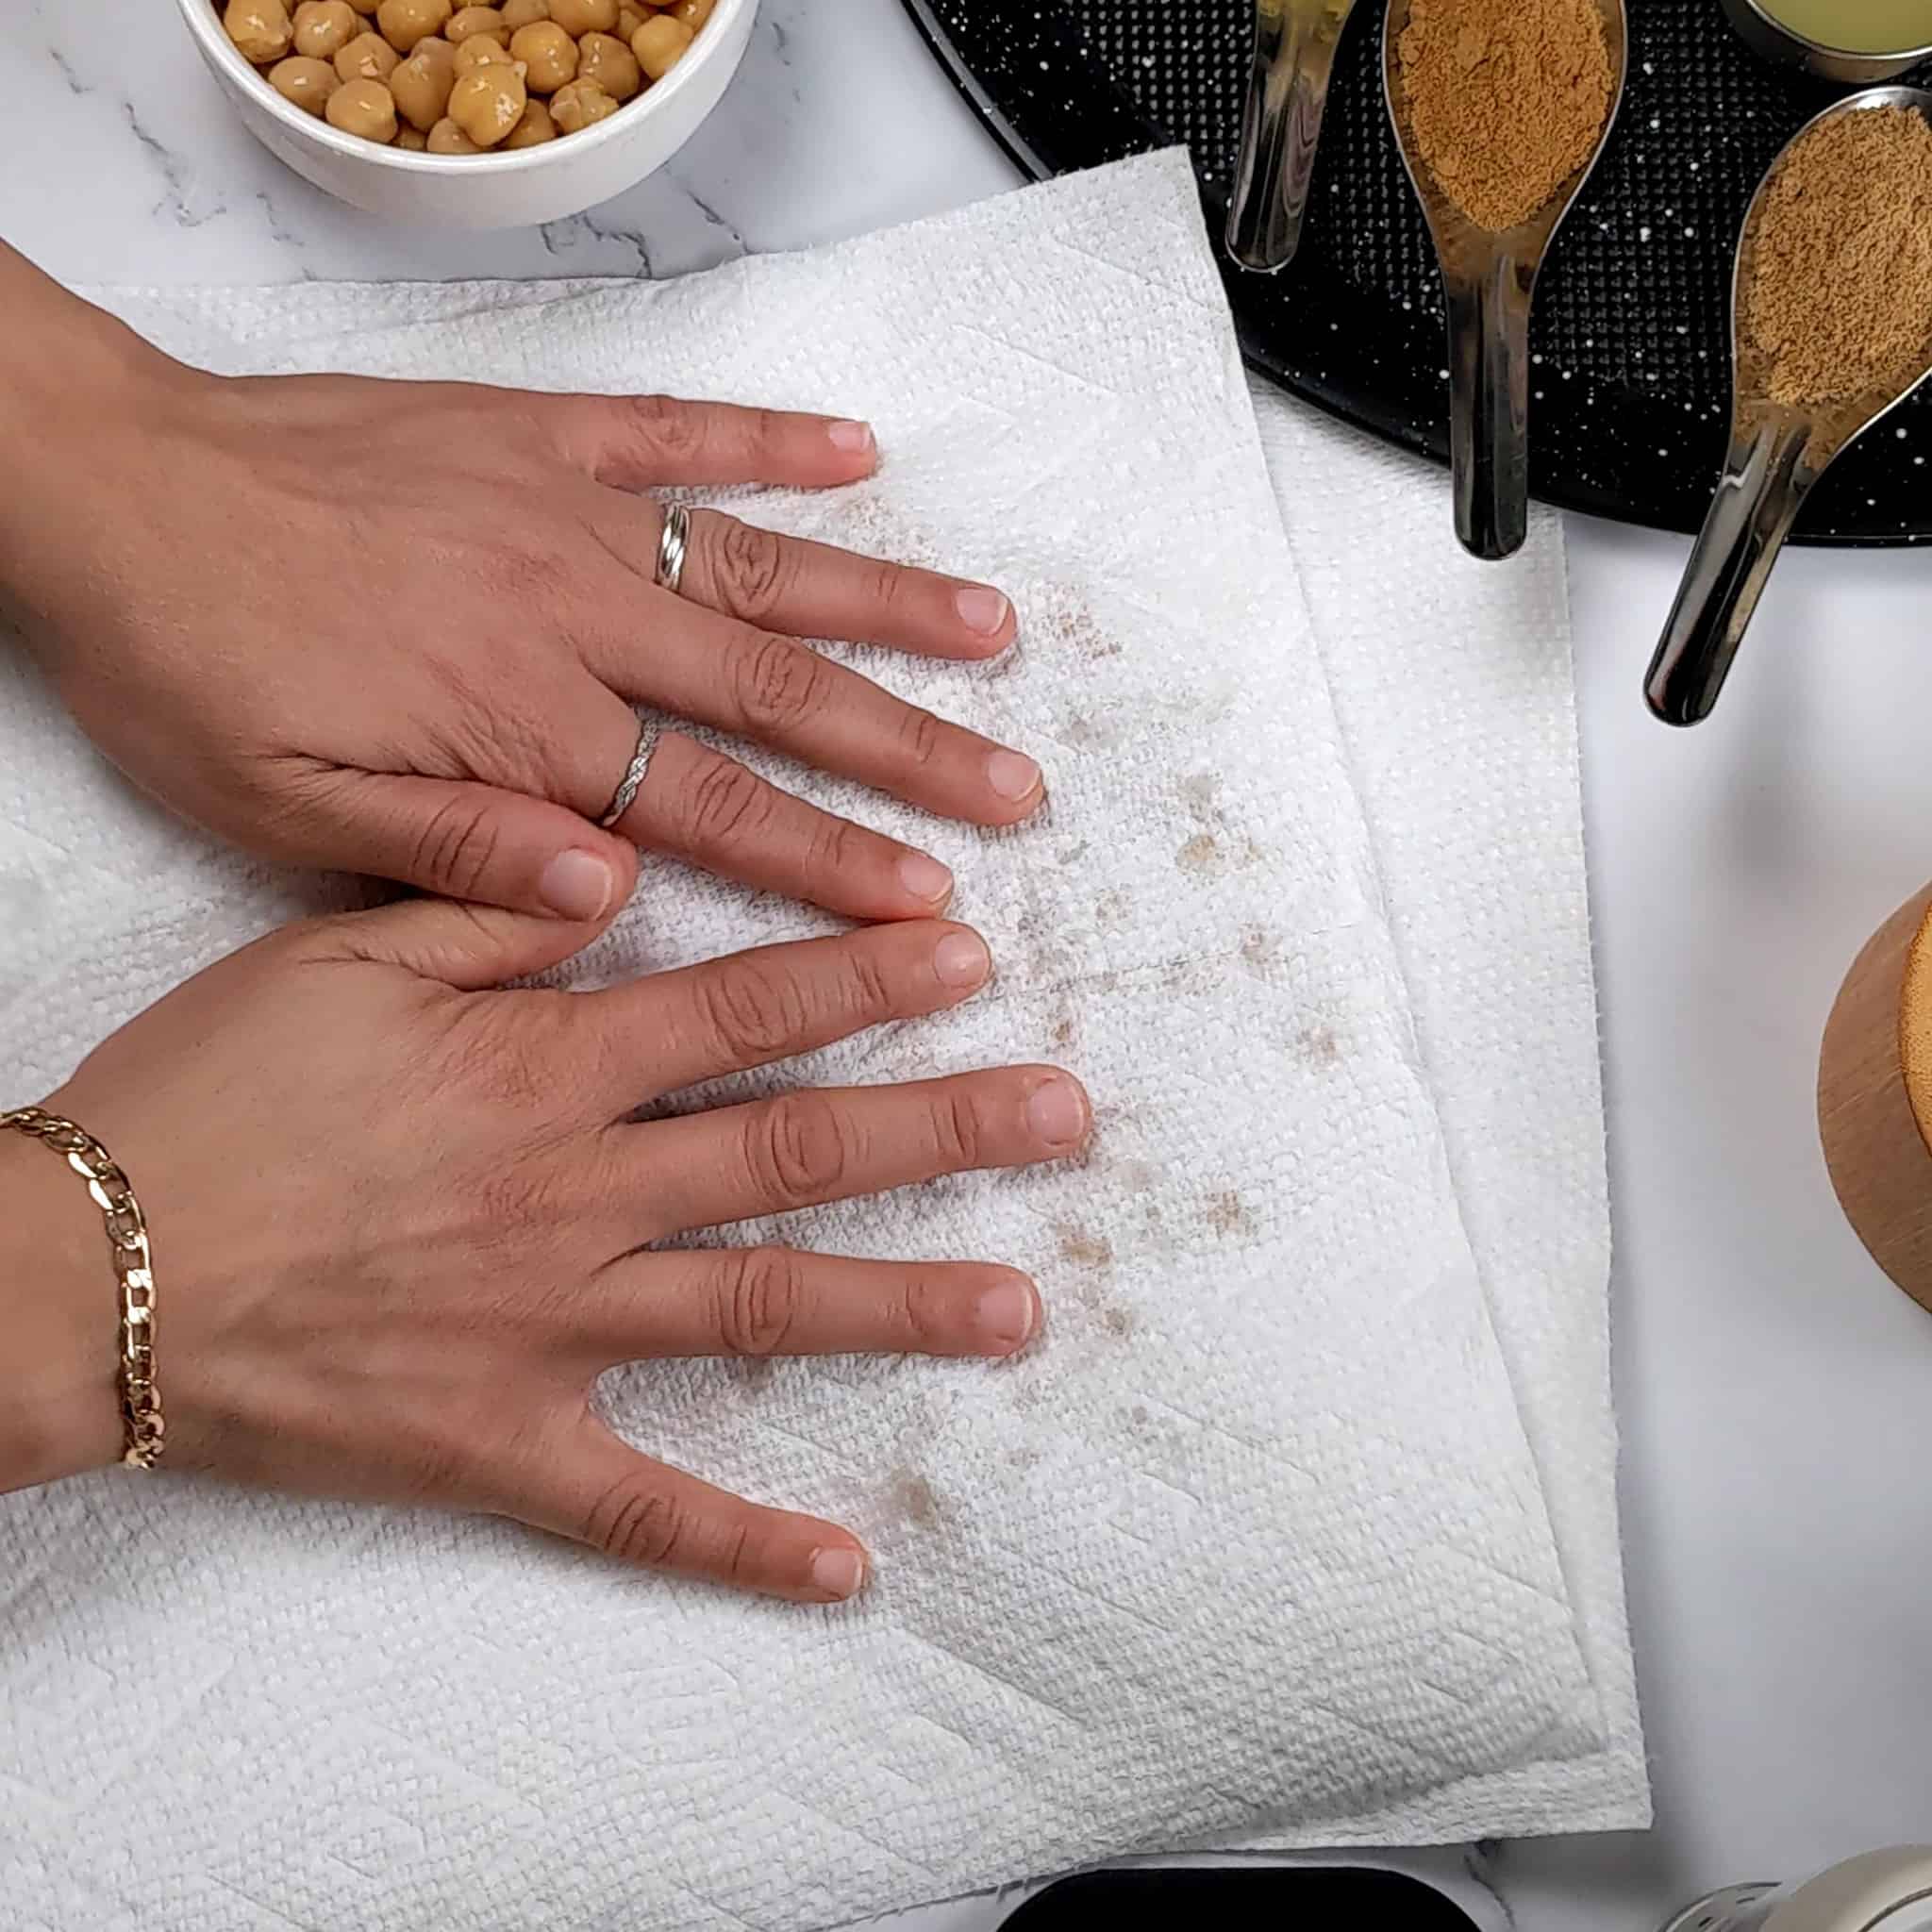 paper towel over chickpeas on a paper towel being padded down with hands